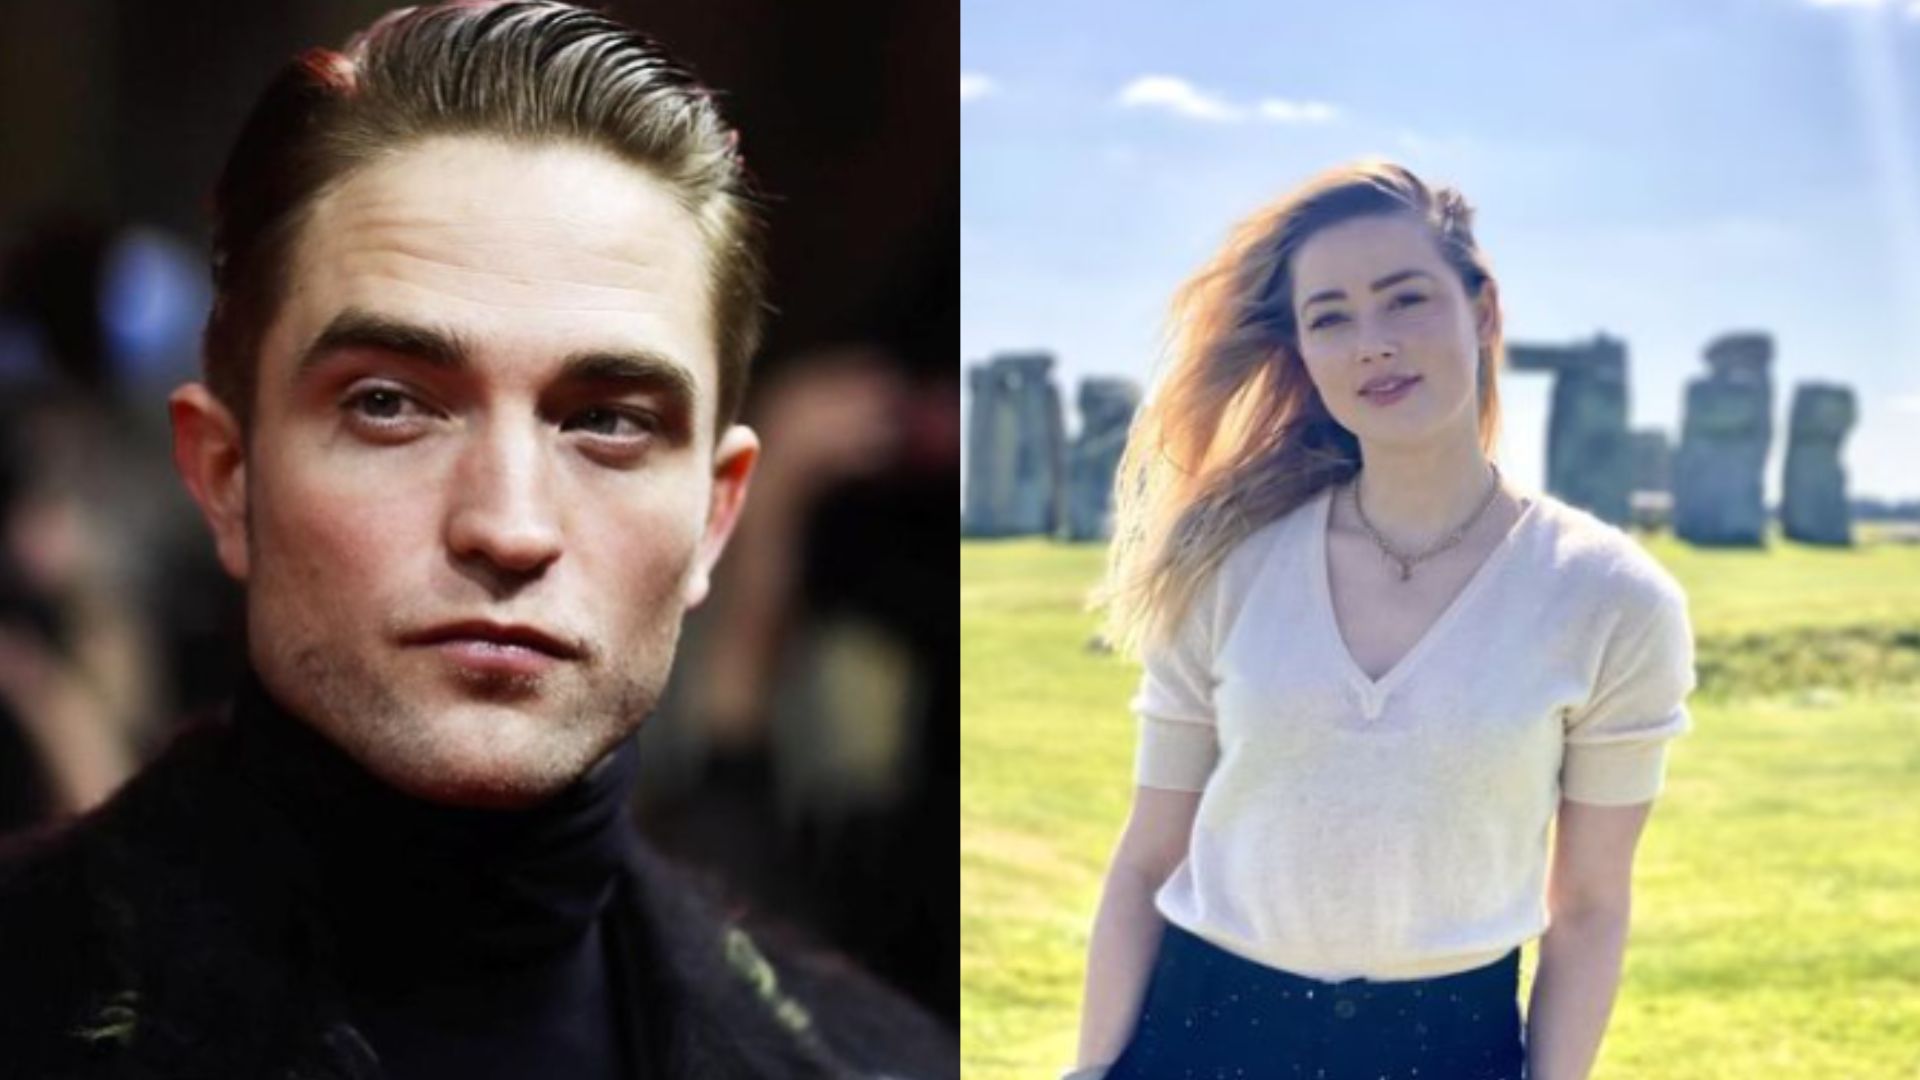 Robert Pattinson And Amber Heard Have The Most Beautiful Faces In The World, Says Science. Umm, Do We Care?